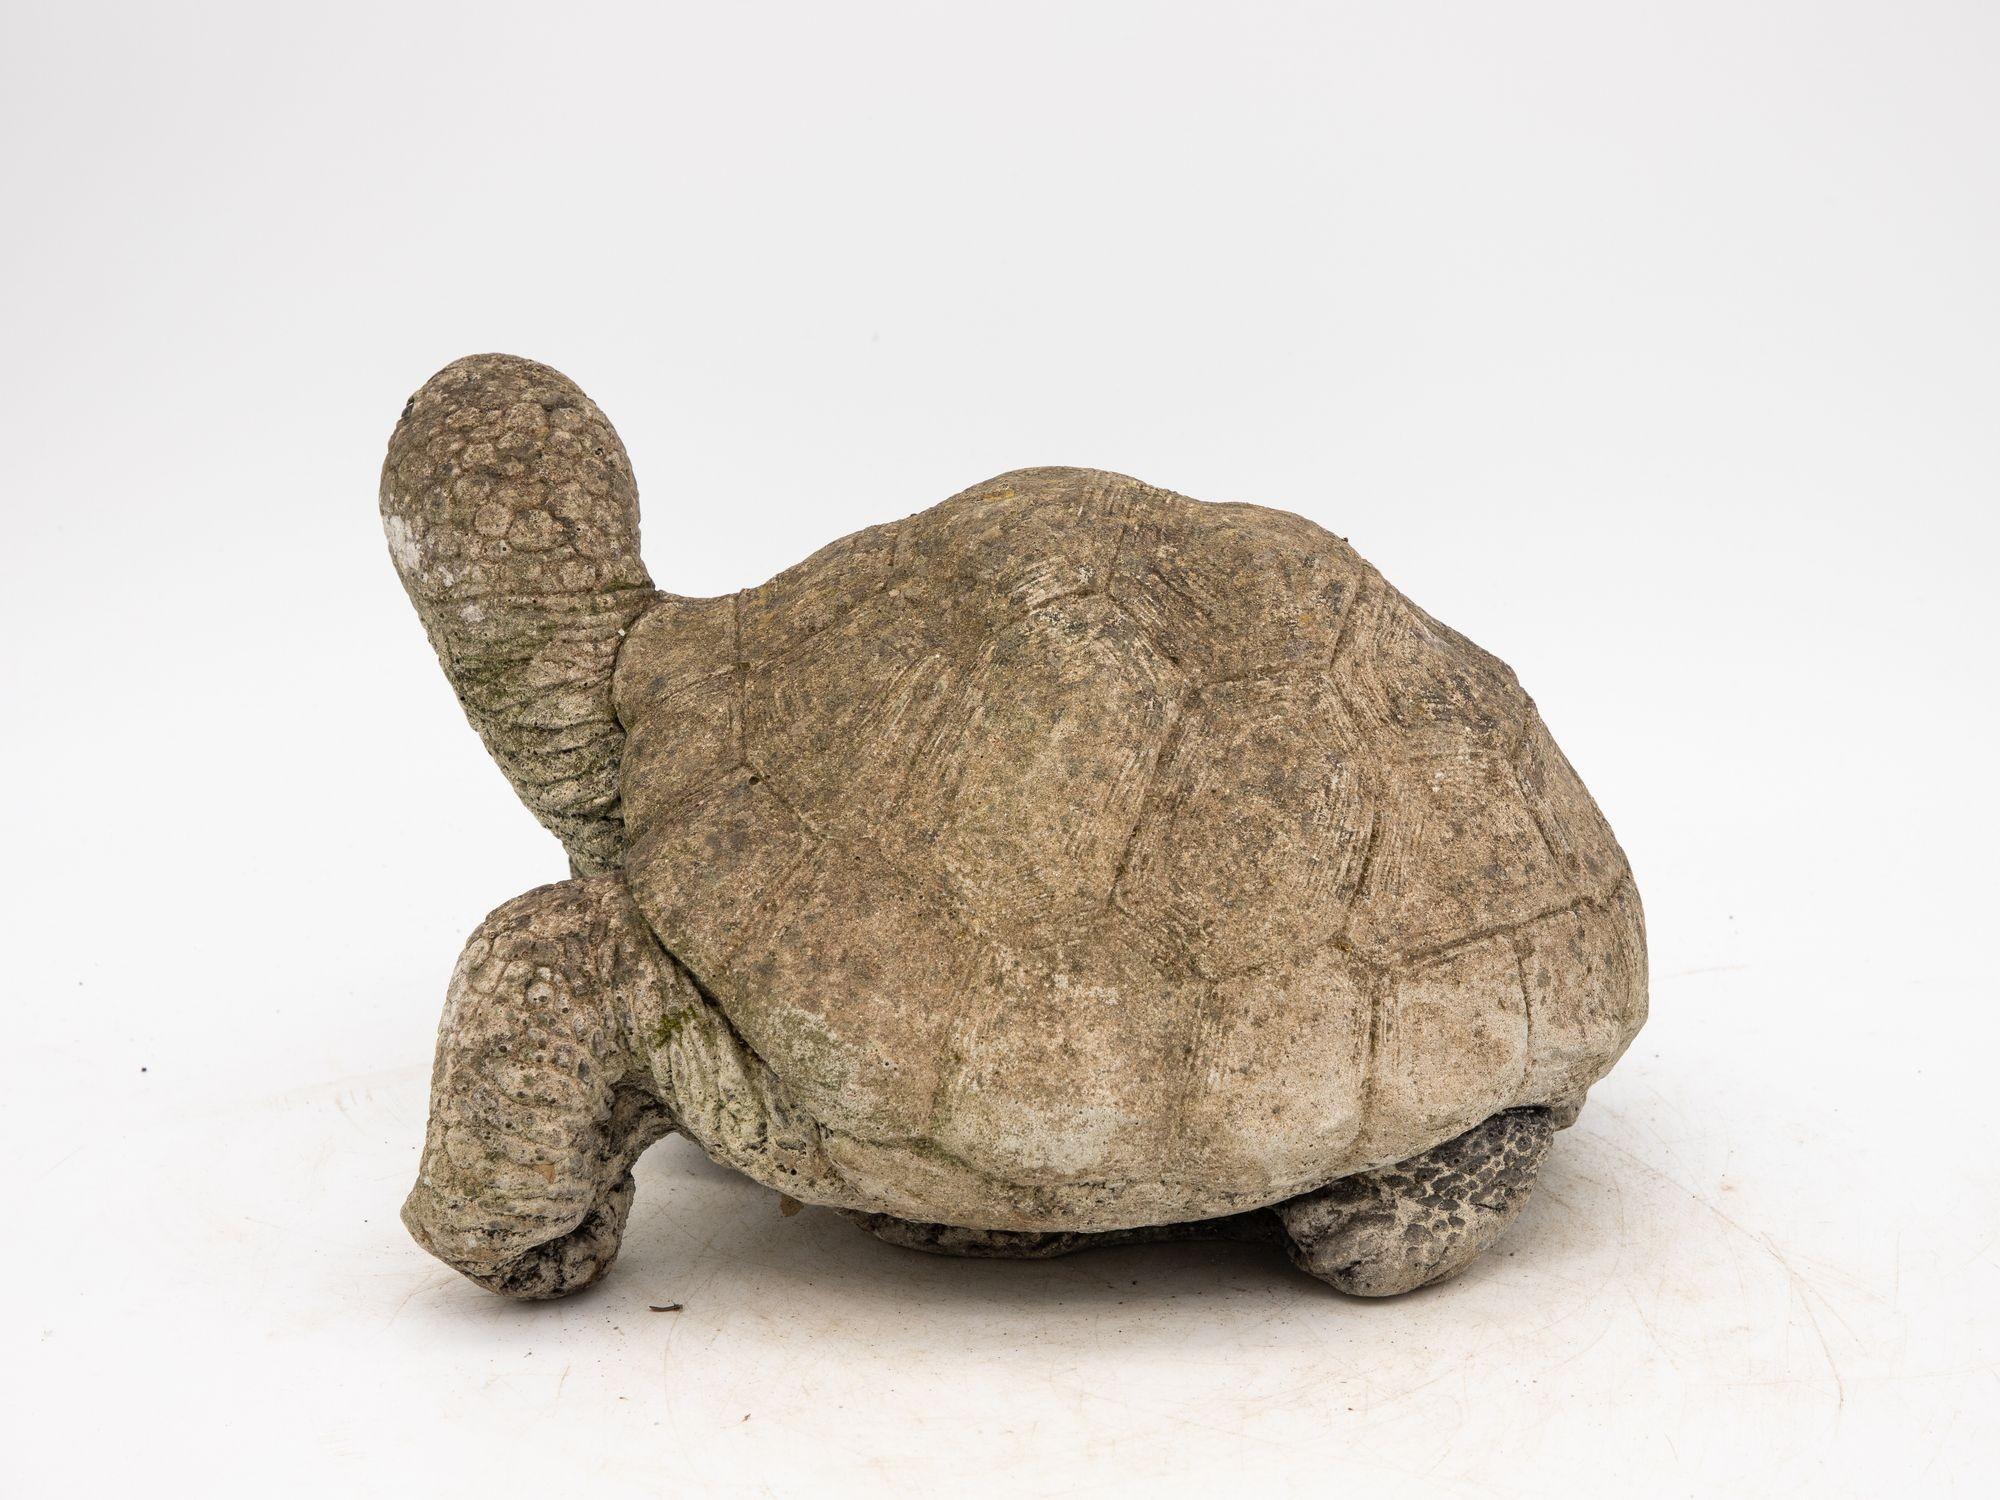 English Vintage Reconstituted Stone Tortoise or Turtle Garden Ornament For Sale